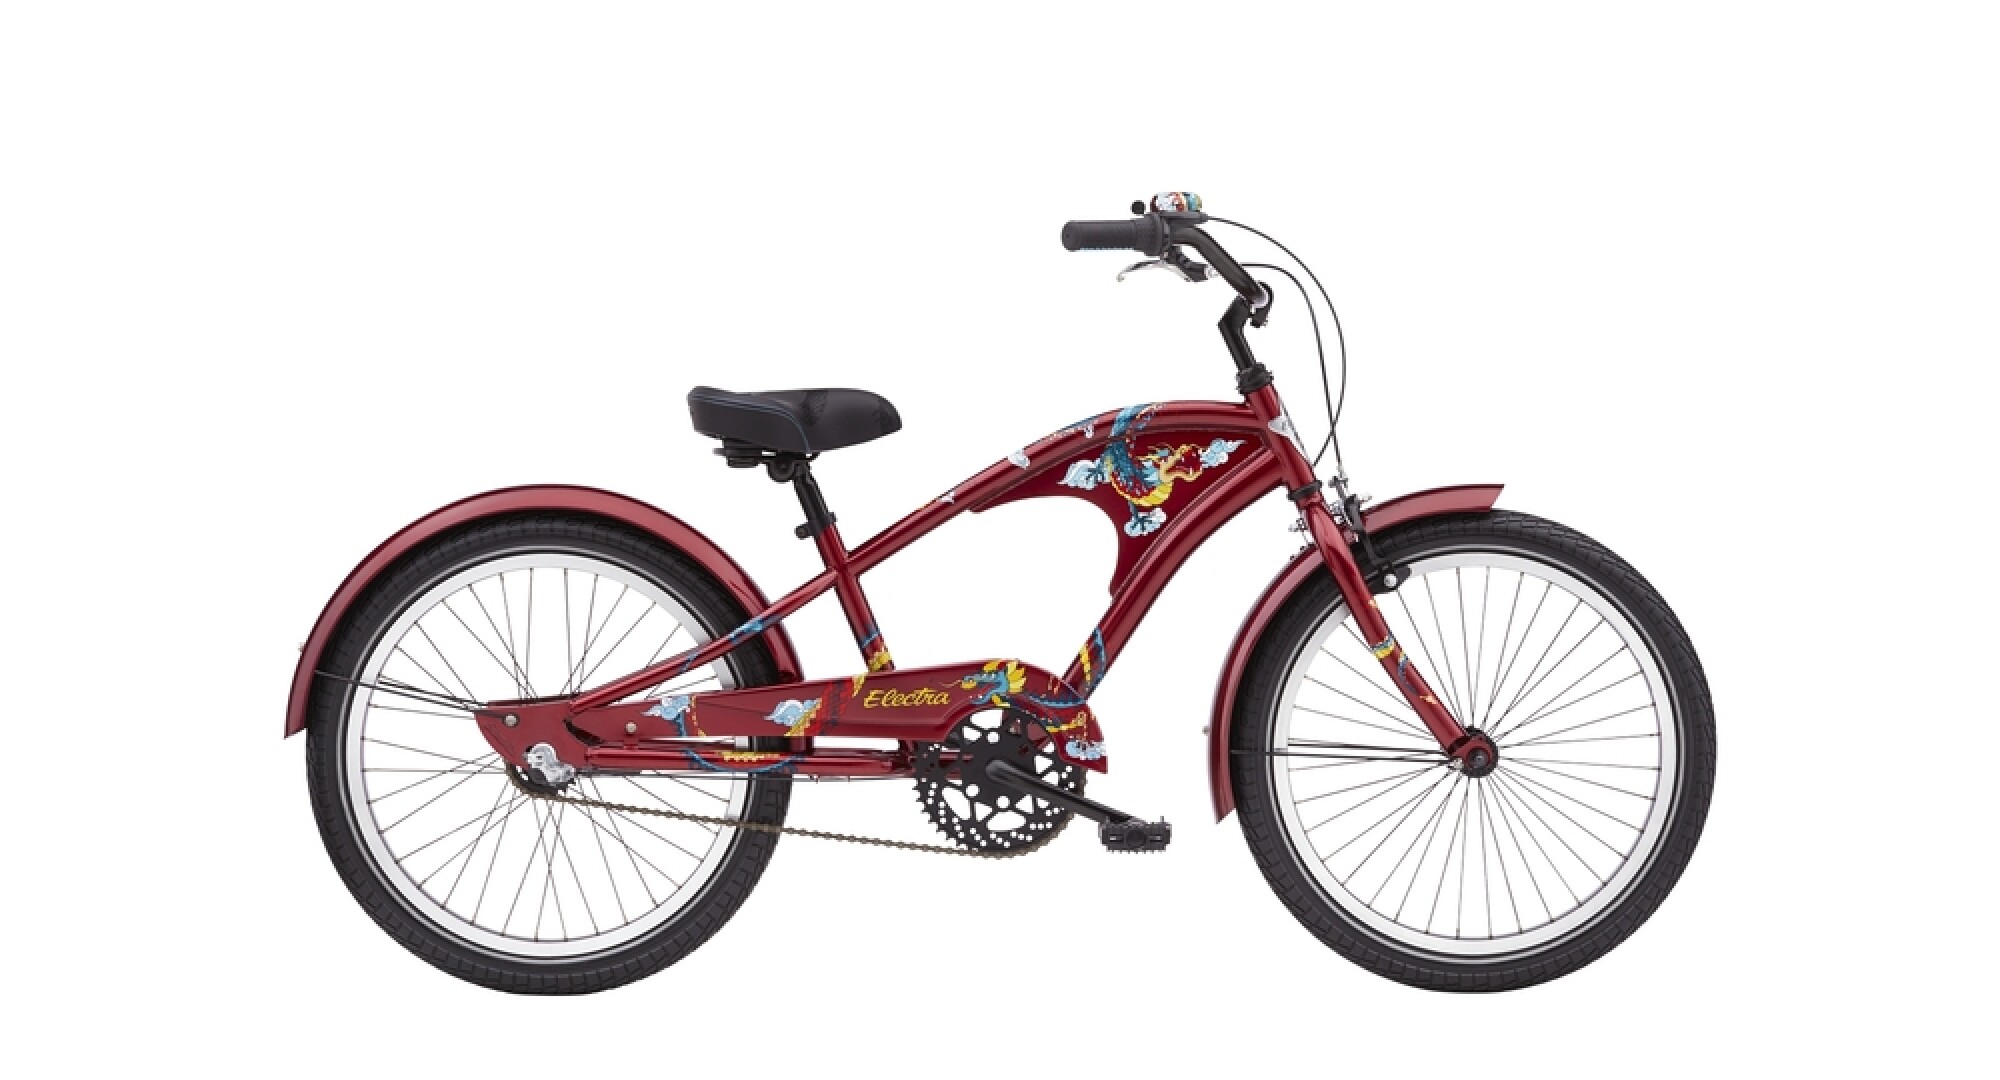 Kinder / Jugend Electra Bicycle Firetail 3i 20"" 2020 bei